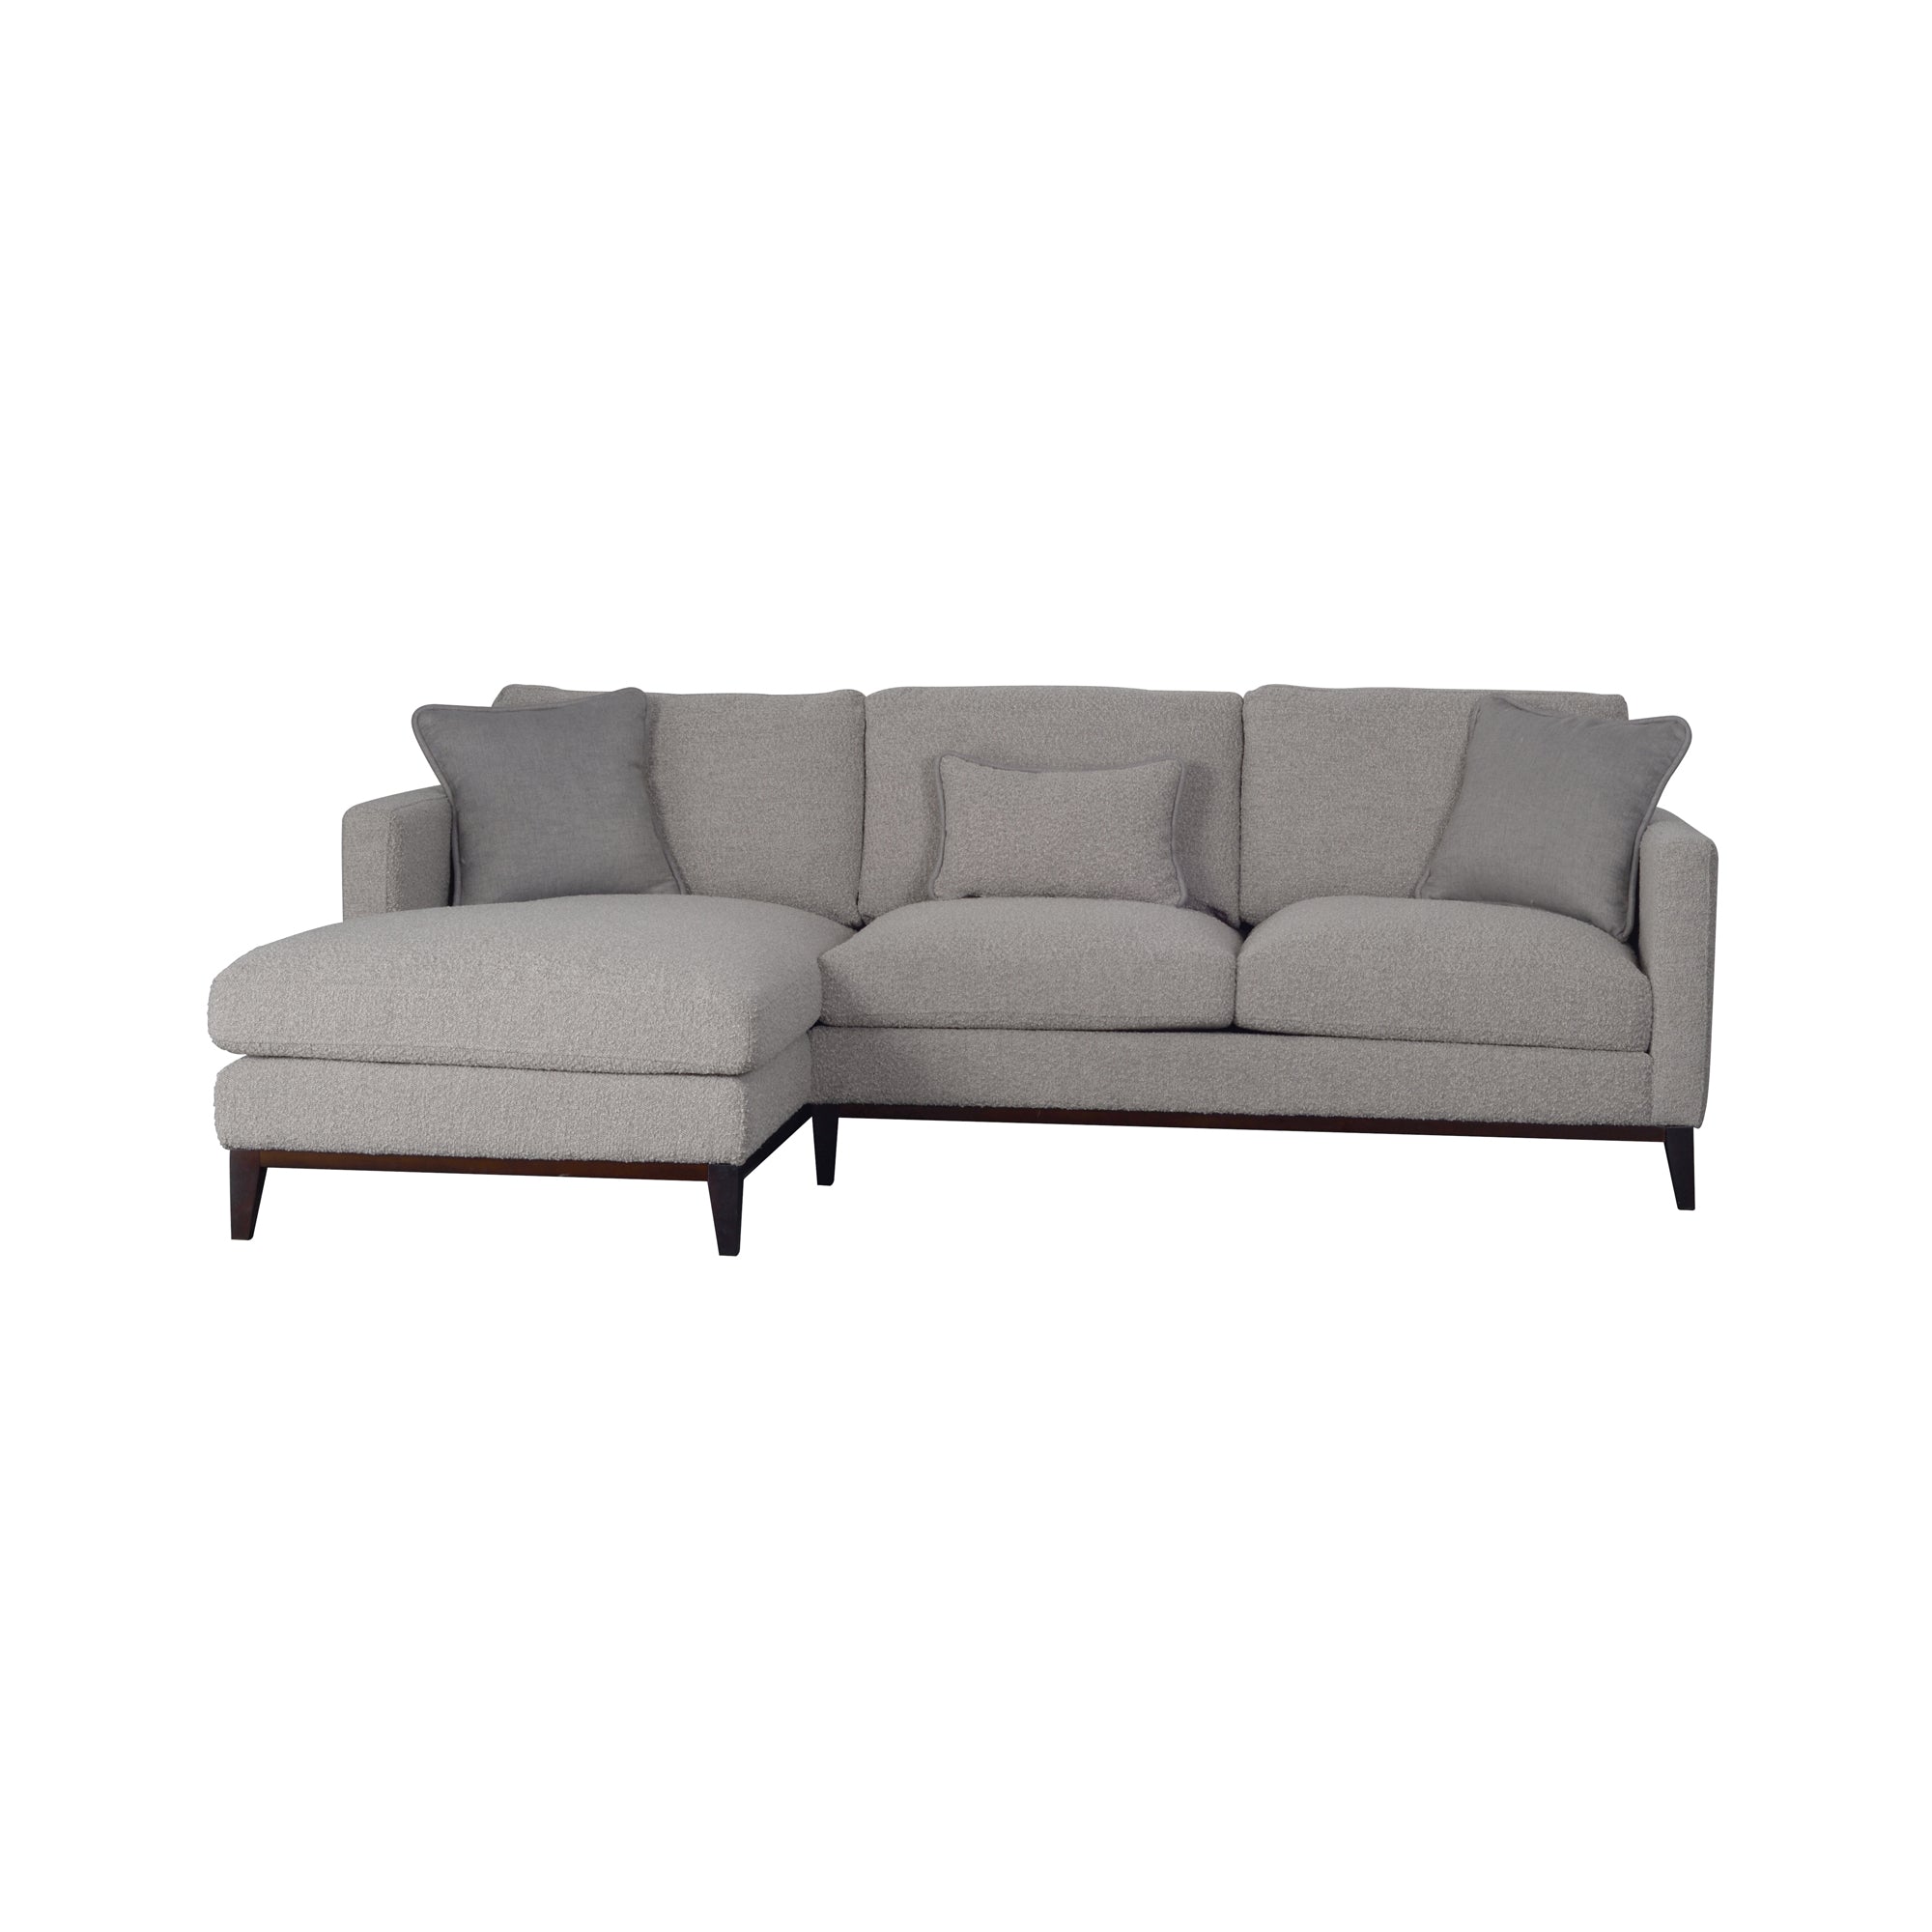 Picture of Burbank Sectional Sofa